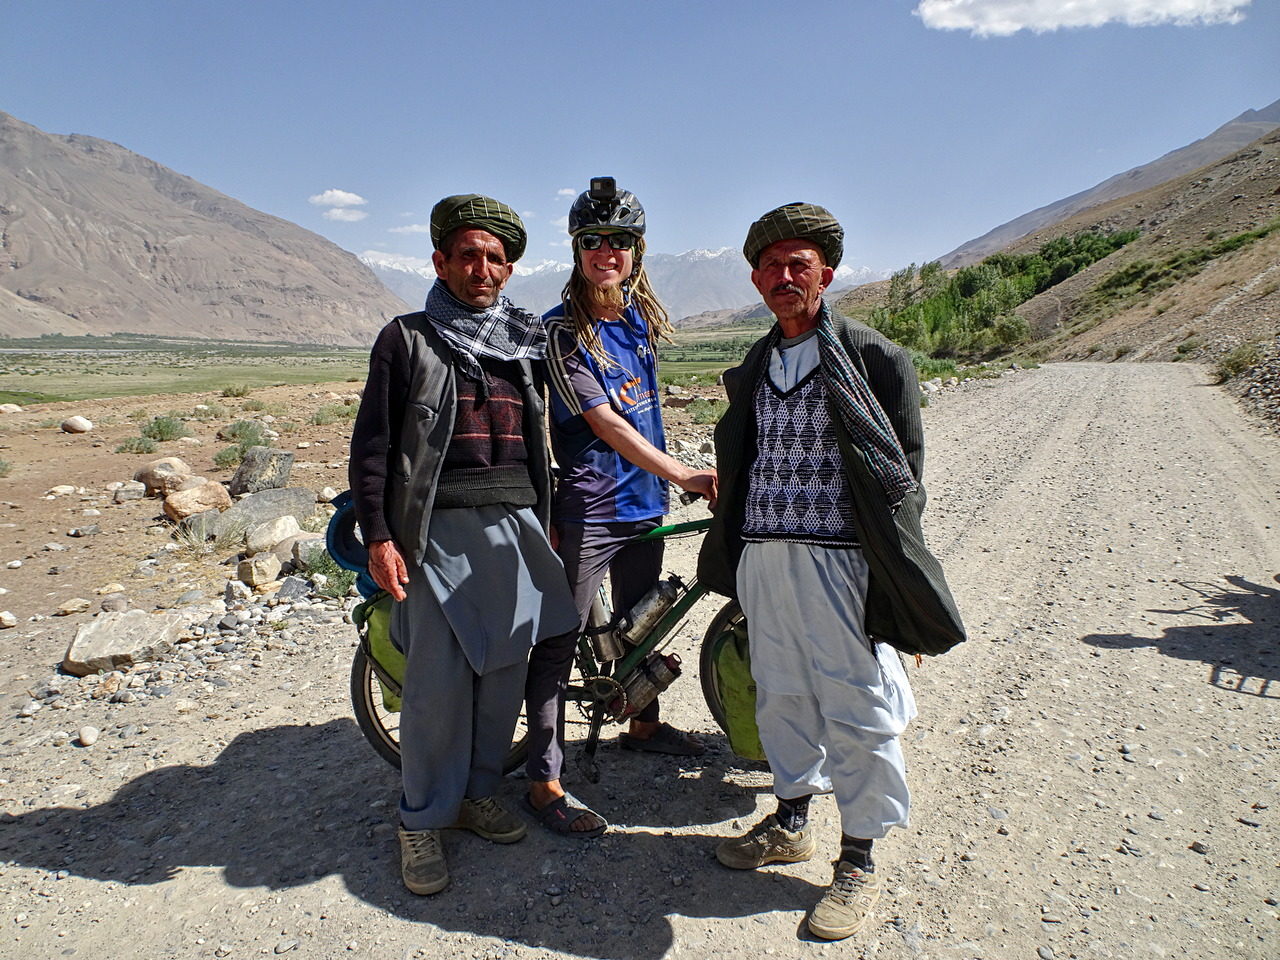 Taking a picture with locals in Afghanistan